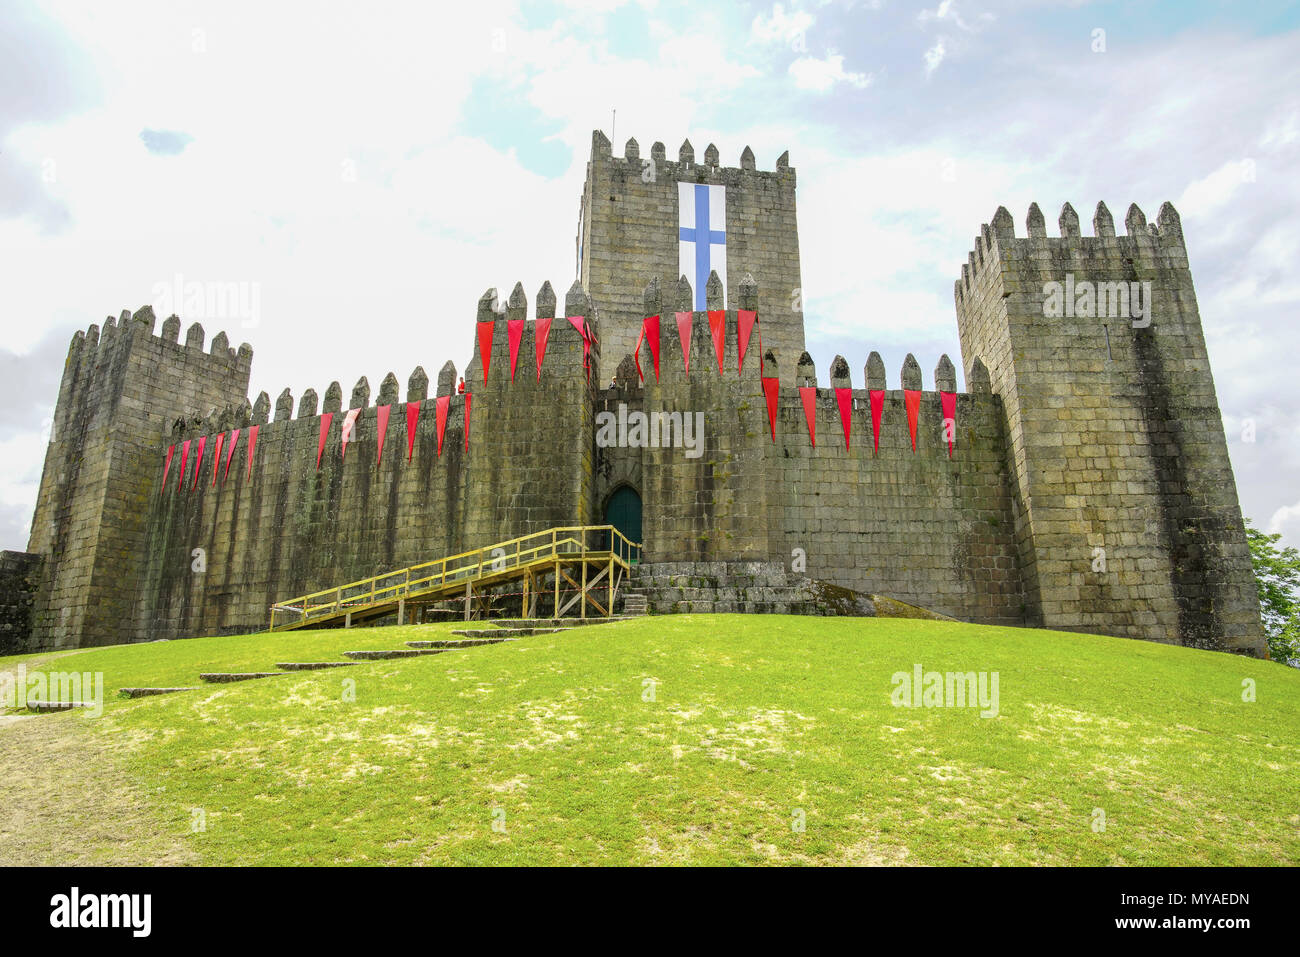 The Castle of Guimarães, Portugal Stock Photo